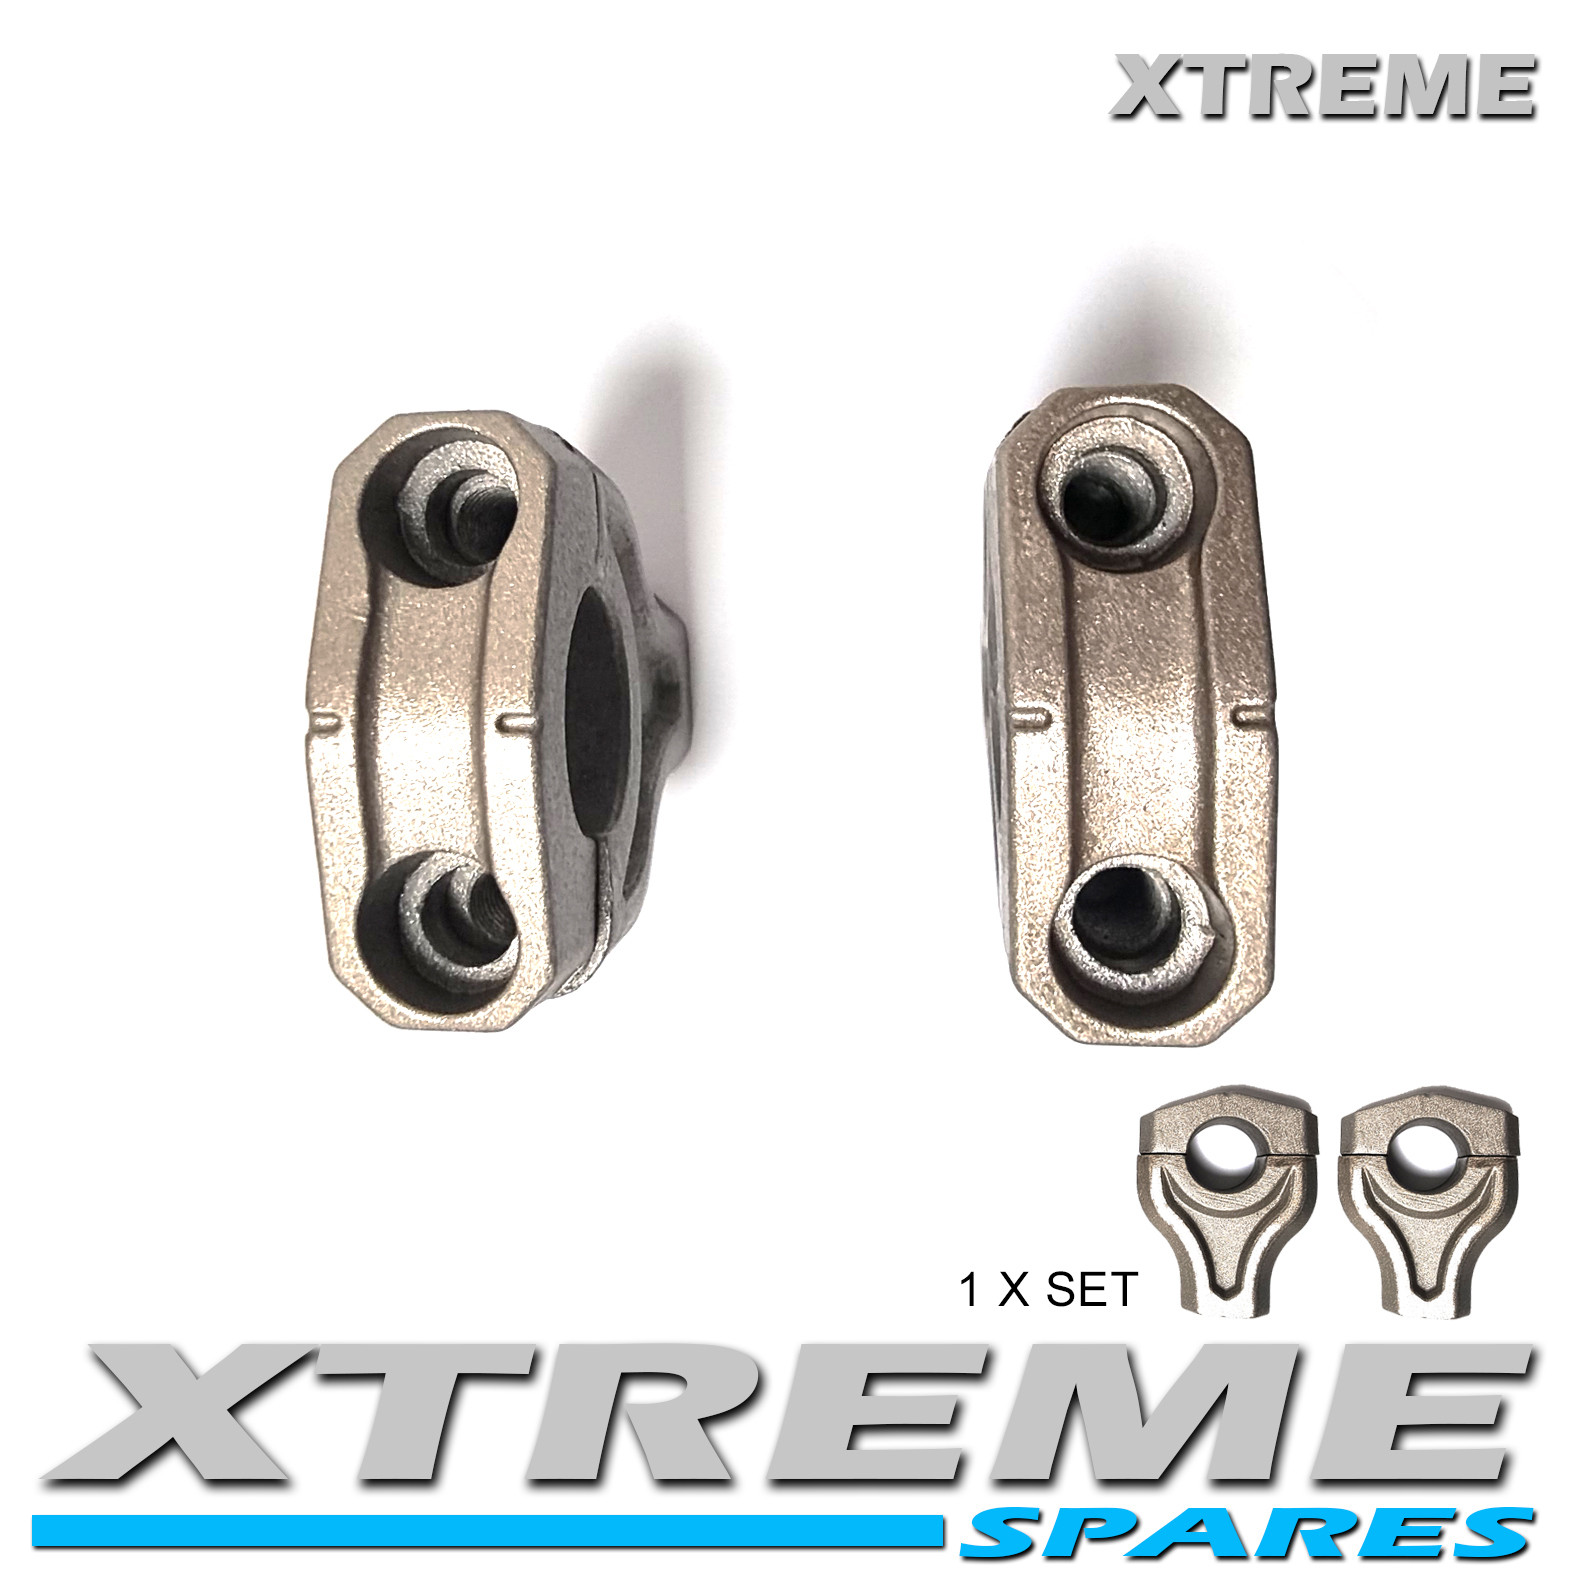 XTREME ELECTRIC XTM MX-PRO REPLACEMENT HANDLEBAR MOUNT AND CLAMP SET